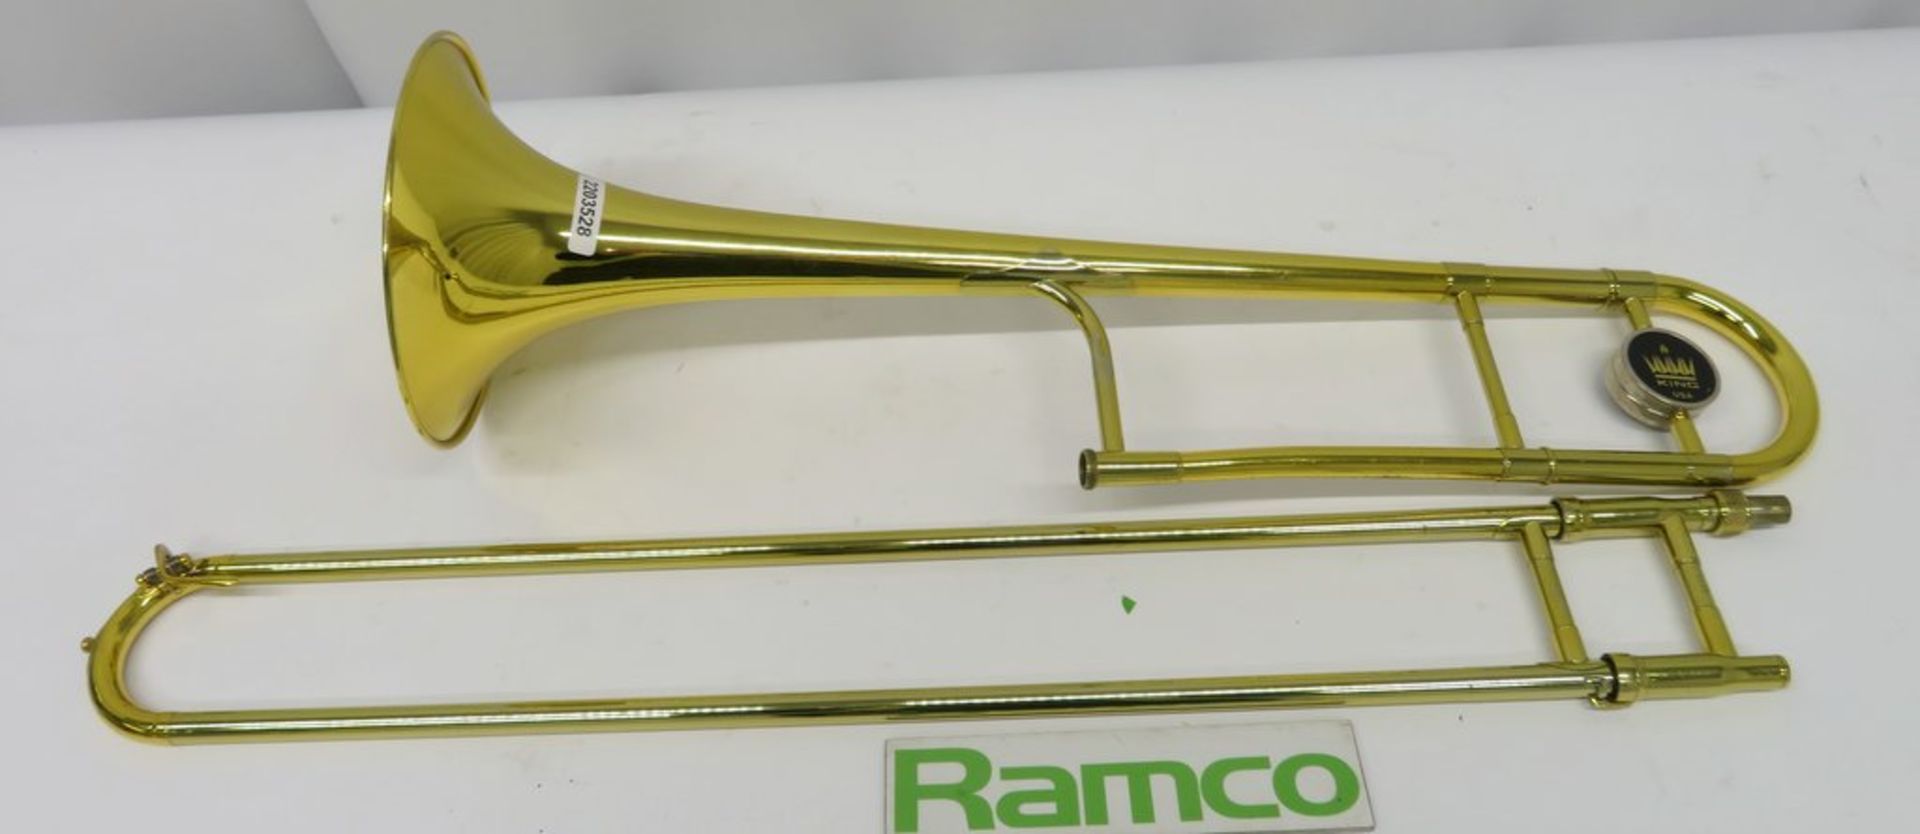 King USA 2013 3B Legend Series Trombone Standard Complete With Case. - Image 3 of 17